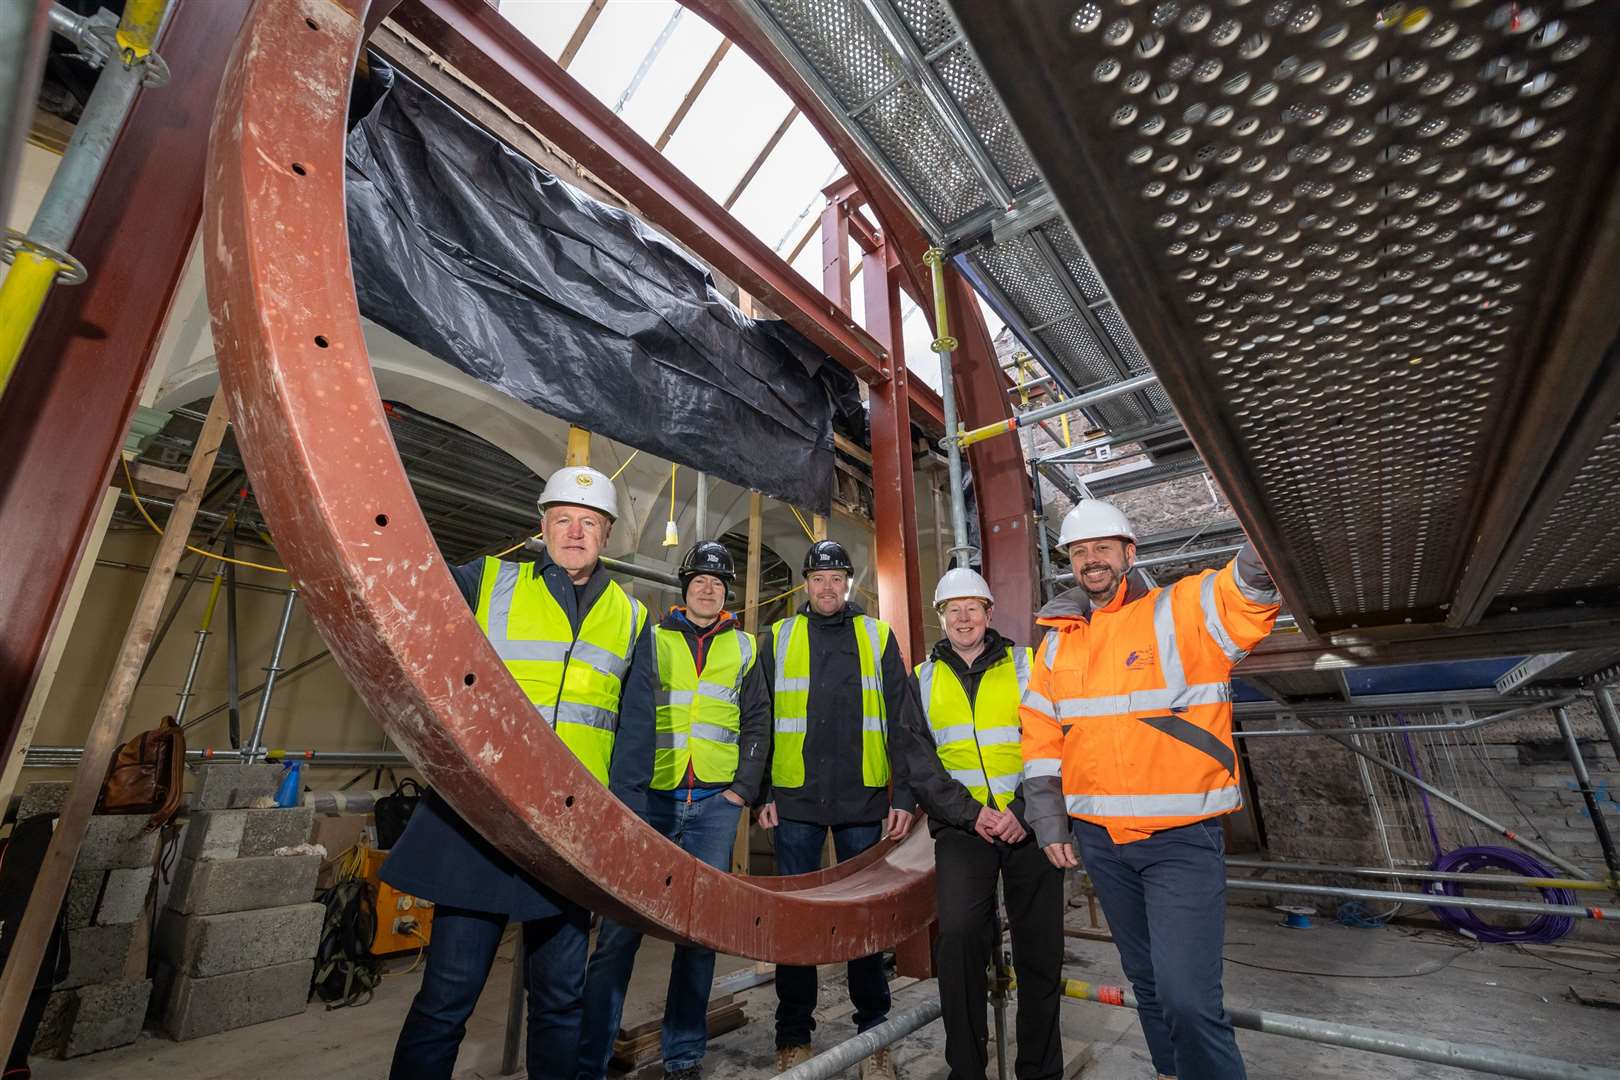 In the Rose Window room: Chris Mather, Mather & Co; Jim Ibbetson, and Joe Fisher from Workhaus Projects, Fiona Hampton, HLH; Jason Kelman, Highland Council. Credit: HLH/Paul Campbell Photography